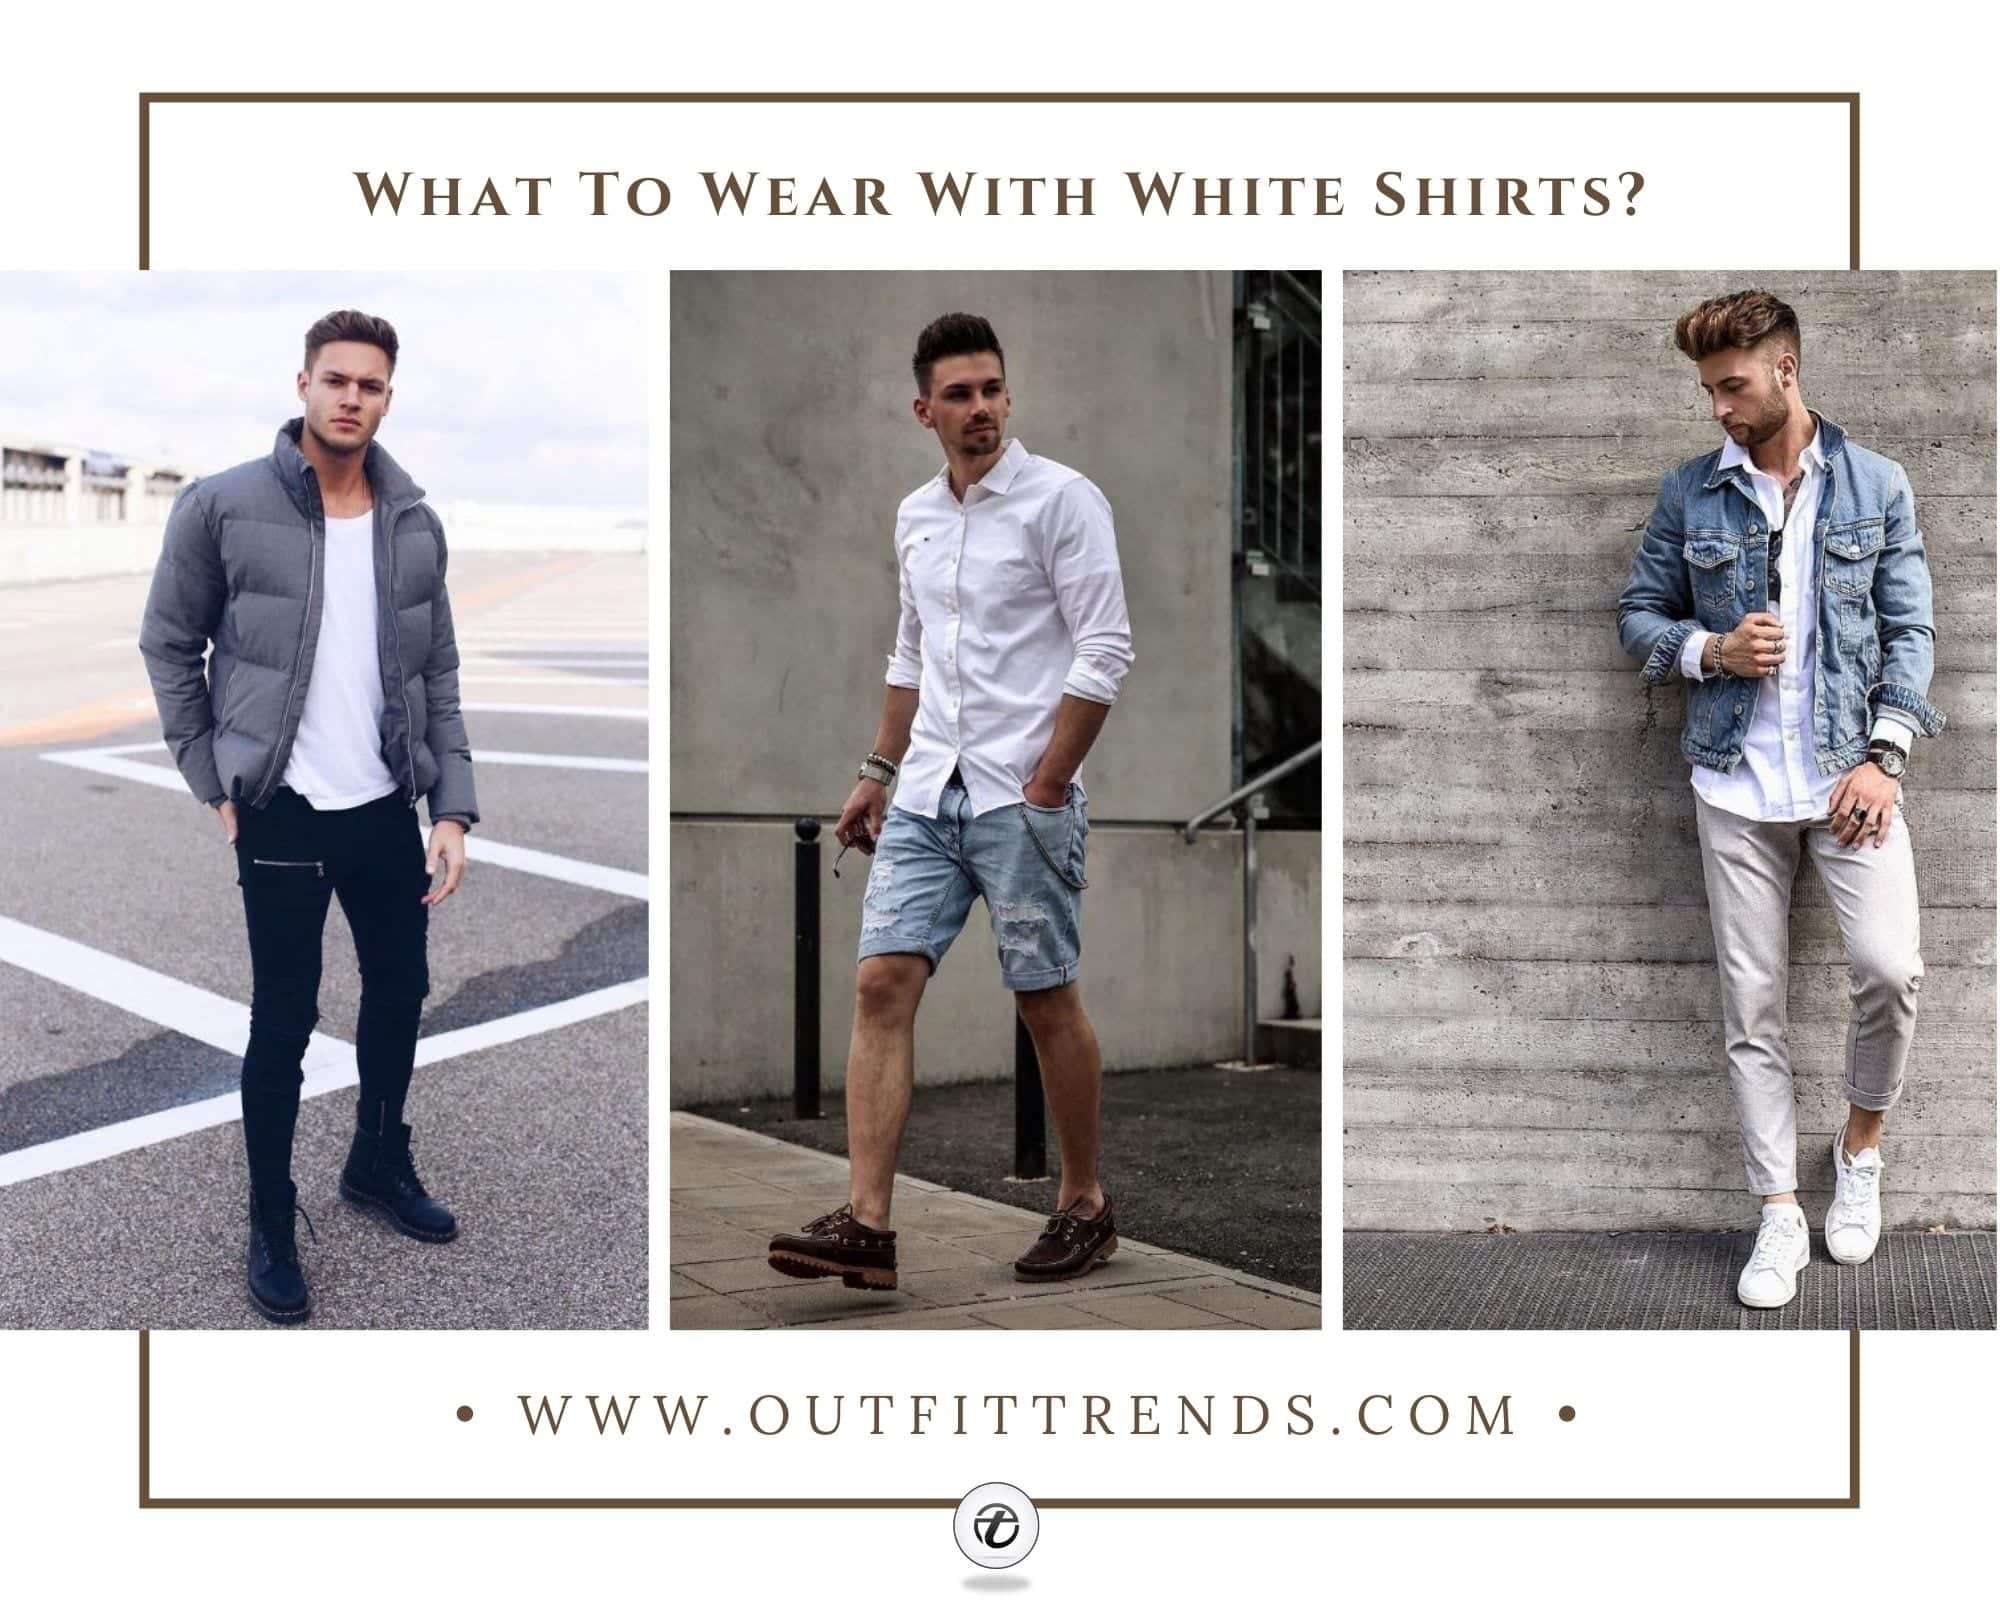 How to Style the White Shirt with Blue Pants  YouTube